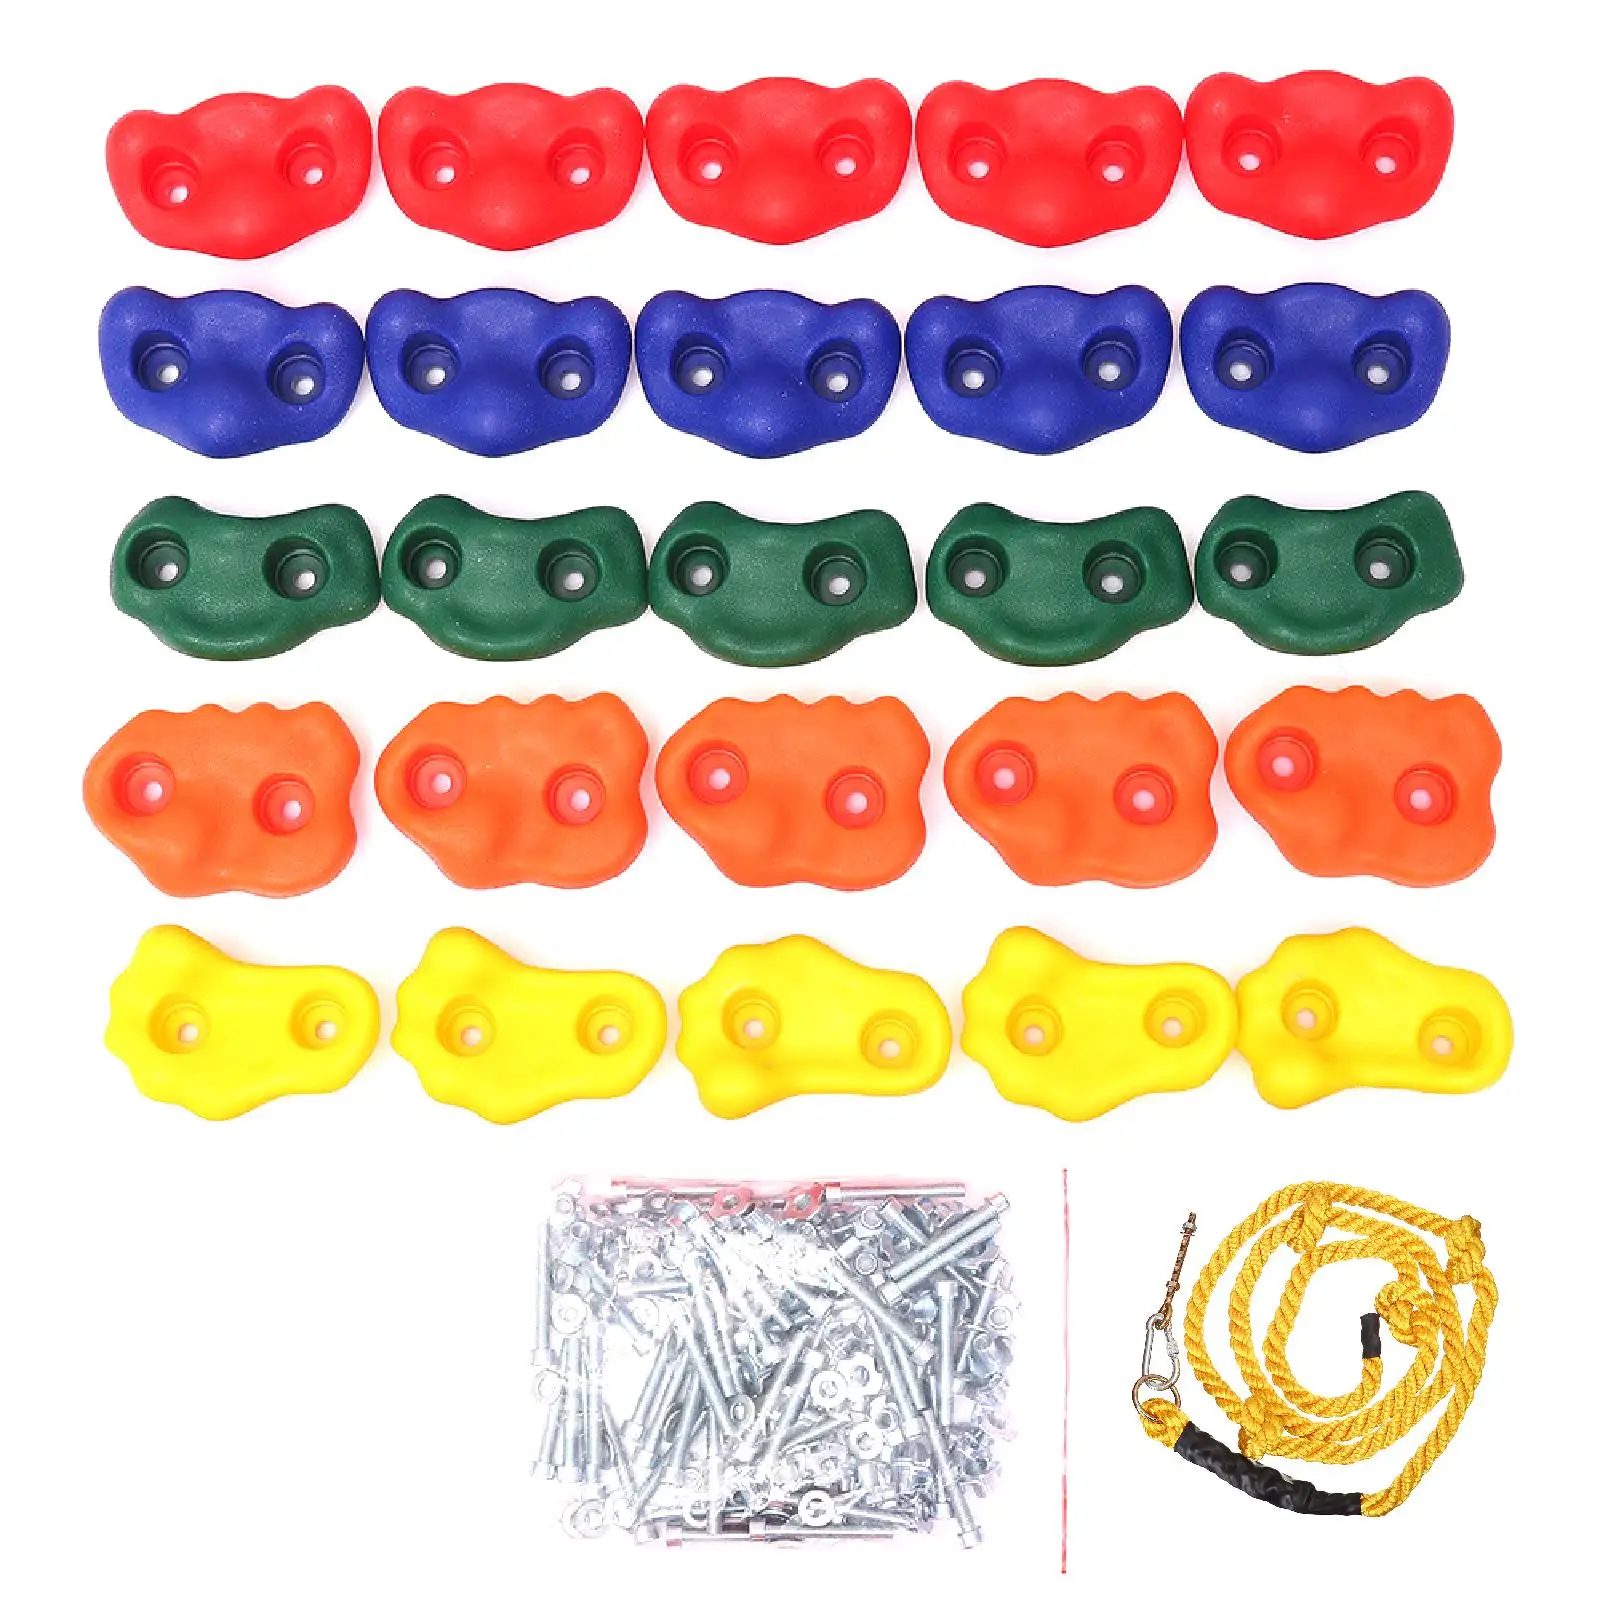 25 Pieces Rock Climbing Holds for Kids Wall Climbing Kits Multicolored Developing Children Flexibility Tree Climbing Holds